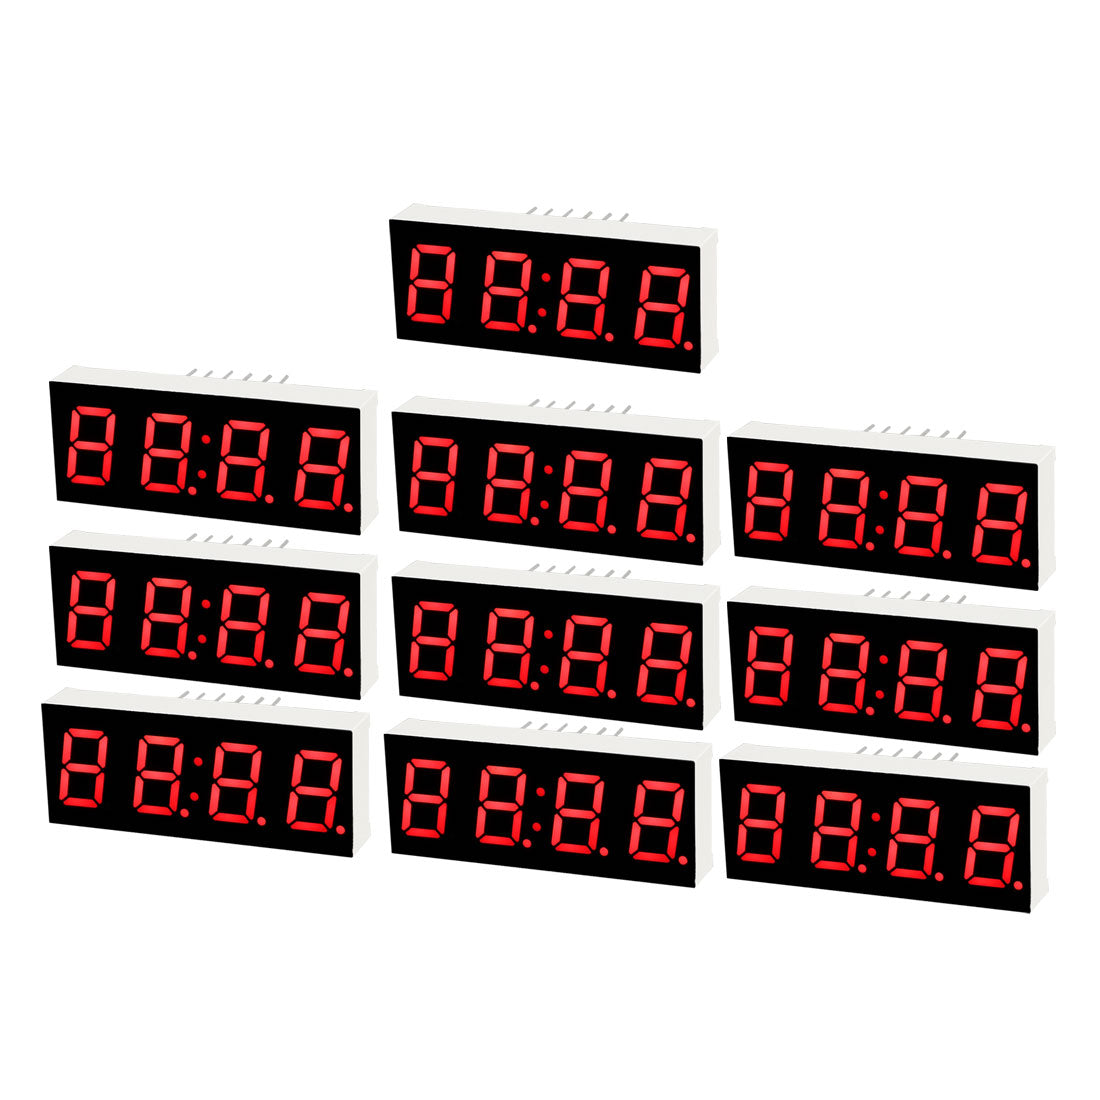 uxcell Uxcell Common Cathode 12 Pin 4 Bit 7 Segment 1.57 x 0.63 x 0.28 Inch 0.4" Red LED Display Digital Tube 10pcs